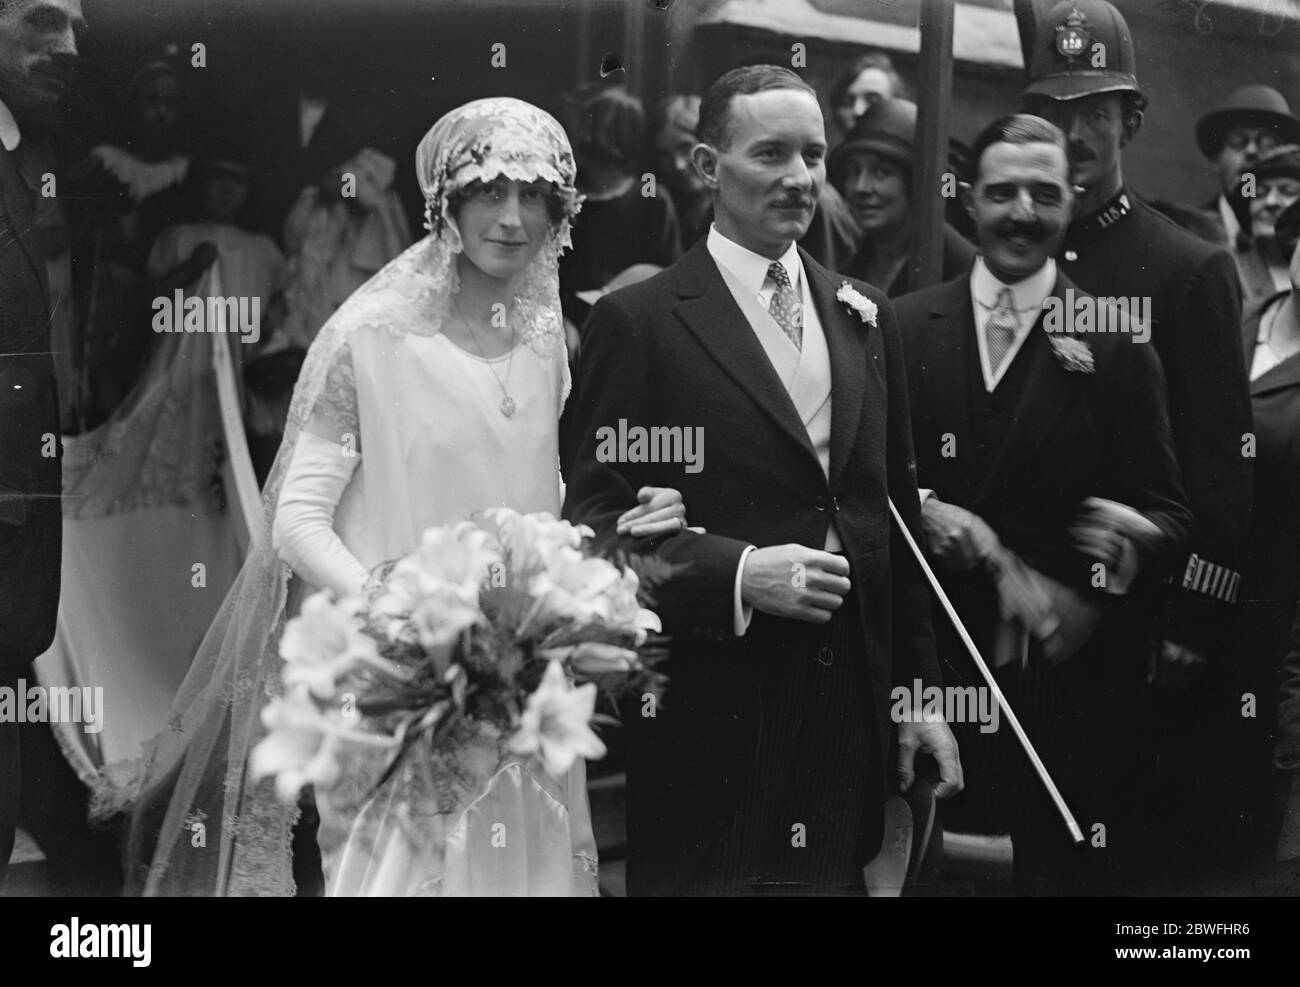 Wedding The wedding took place on Saturday at St James s Church , Sussex Gardens , between Major R A . Spencer , D S O , R A and Miss Maud Evelyn Ramsay , cousin of the Earl of Dalhousie 12 September 1925 Stock Photo